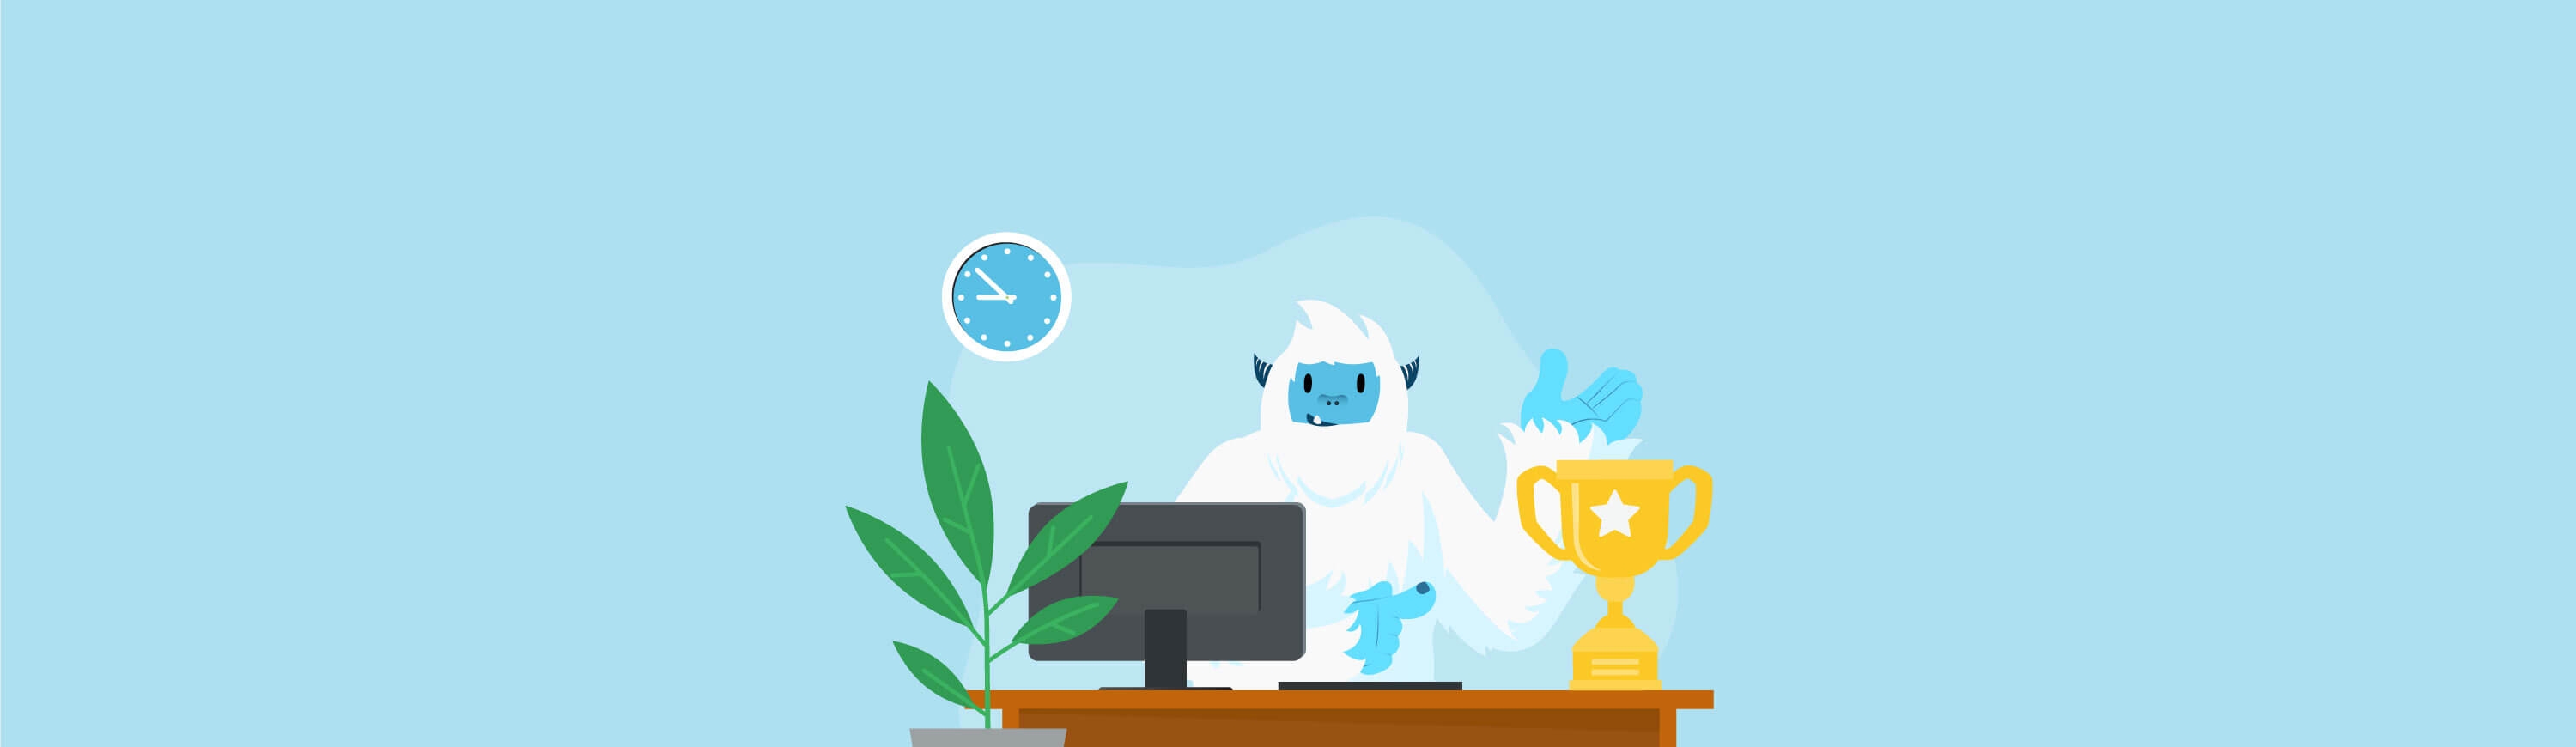 Illustration of Carl the yeti sitting at a desk with a computer, pointing towards a trophy.